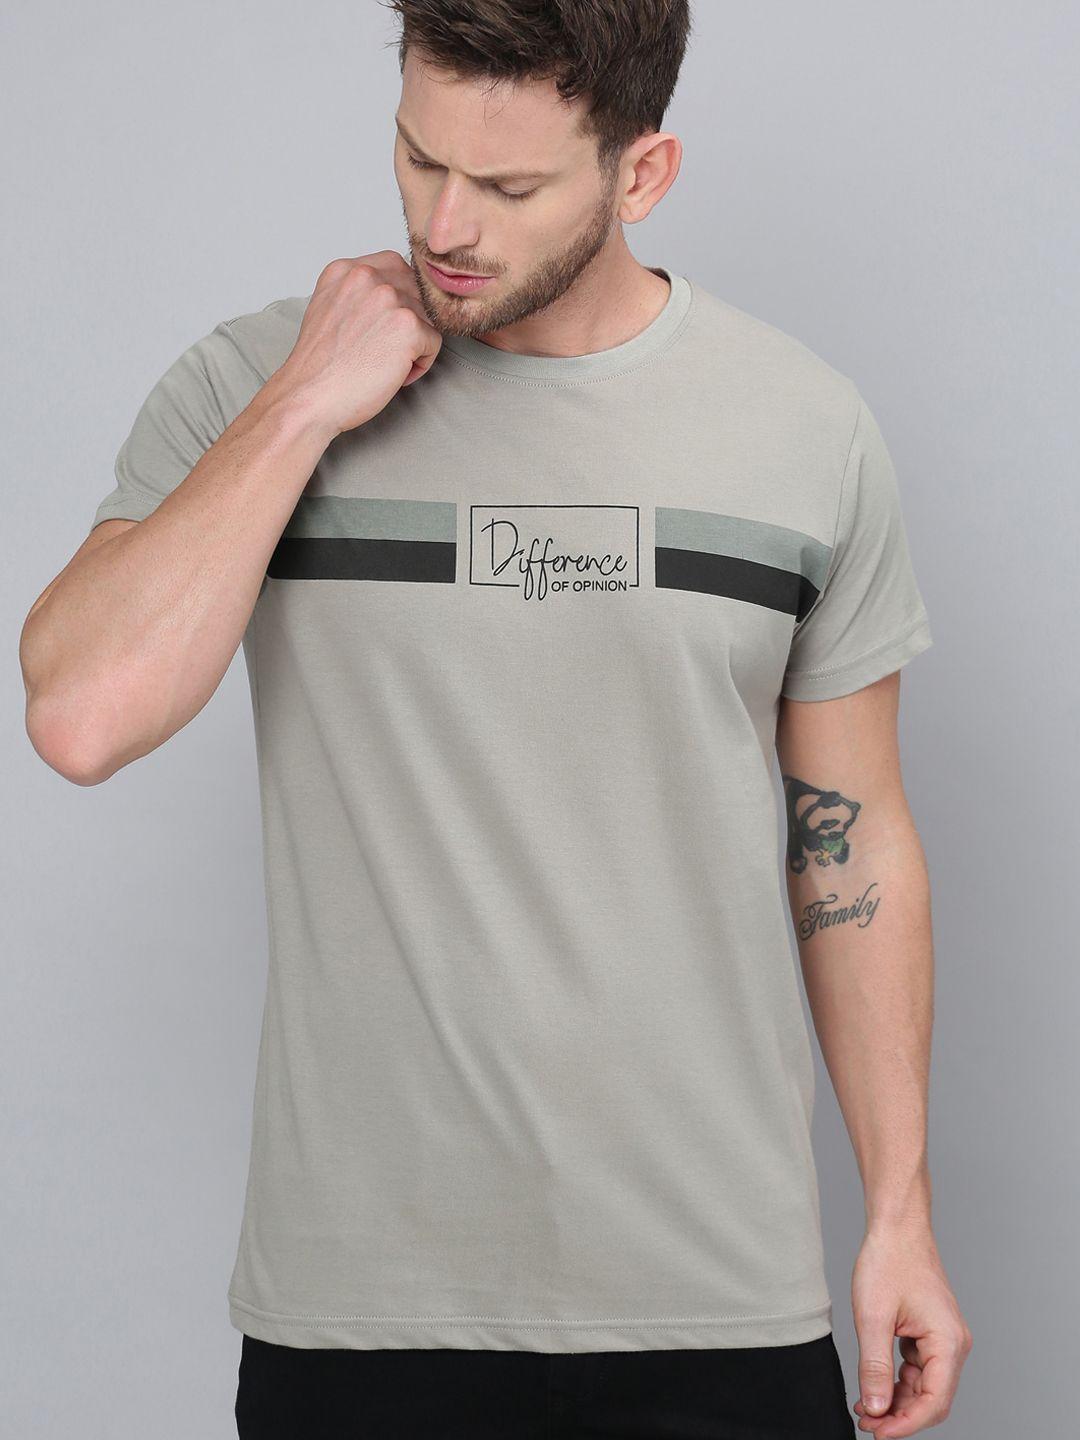 difference of opinion men grey & black colourblocked round neck t-shirt